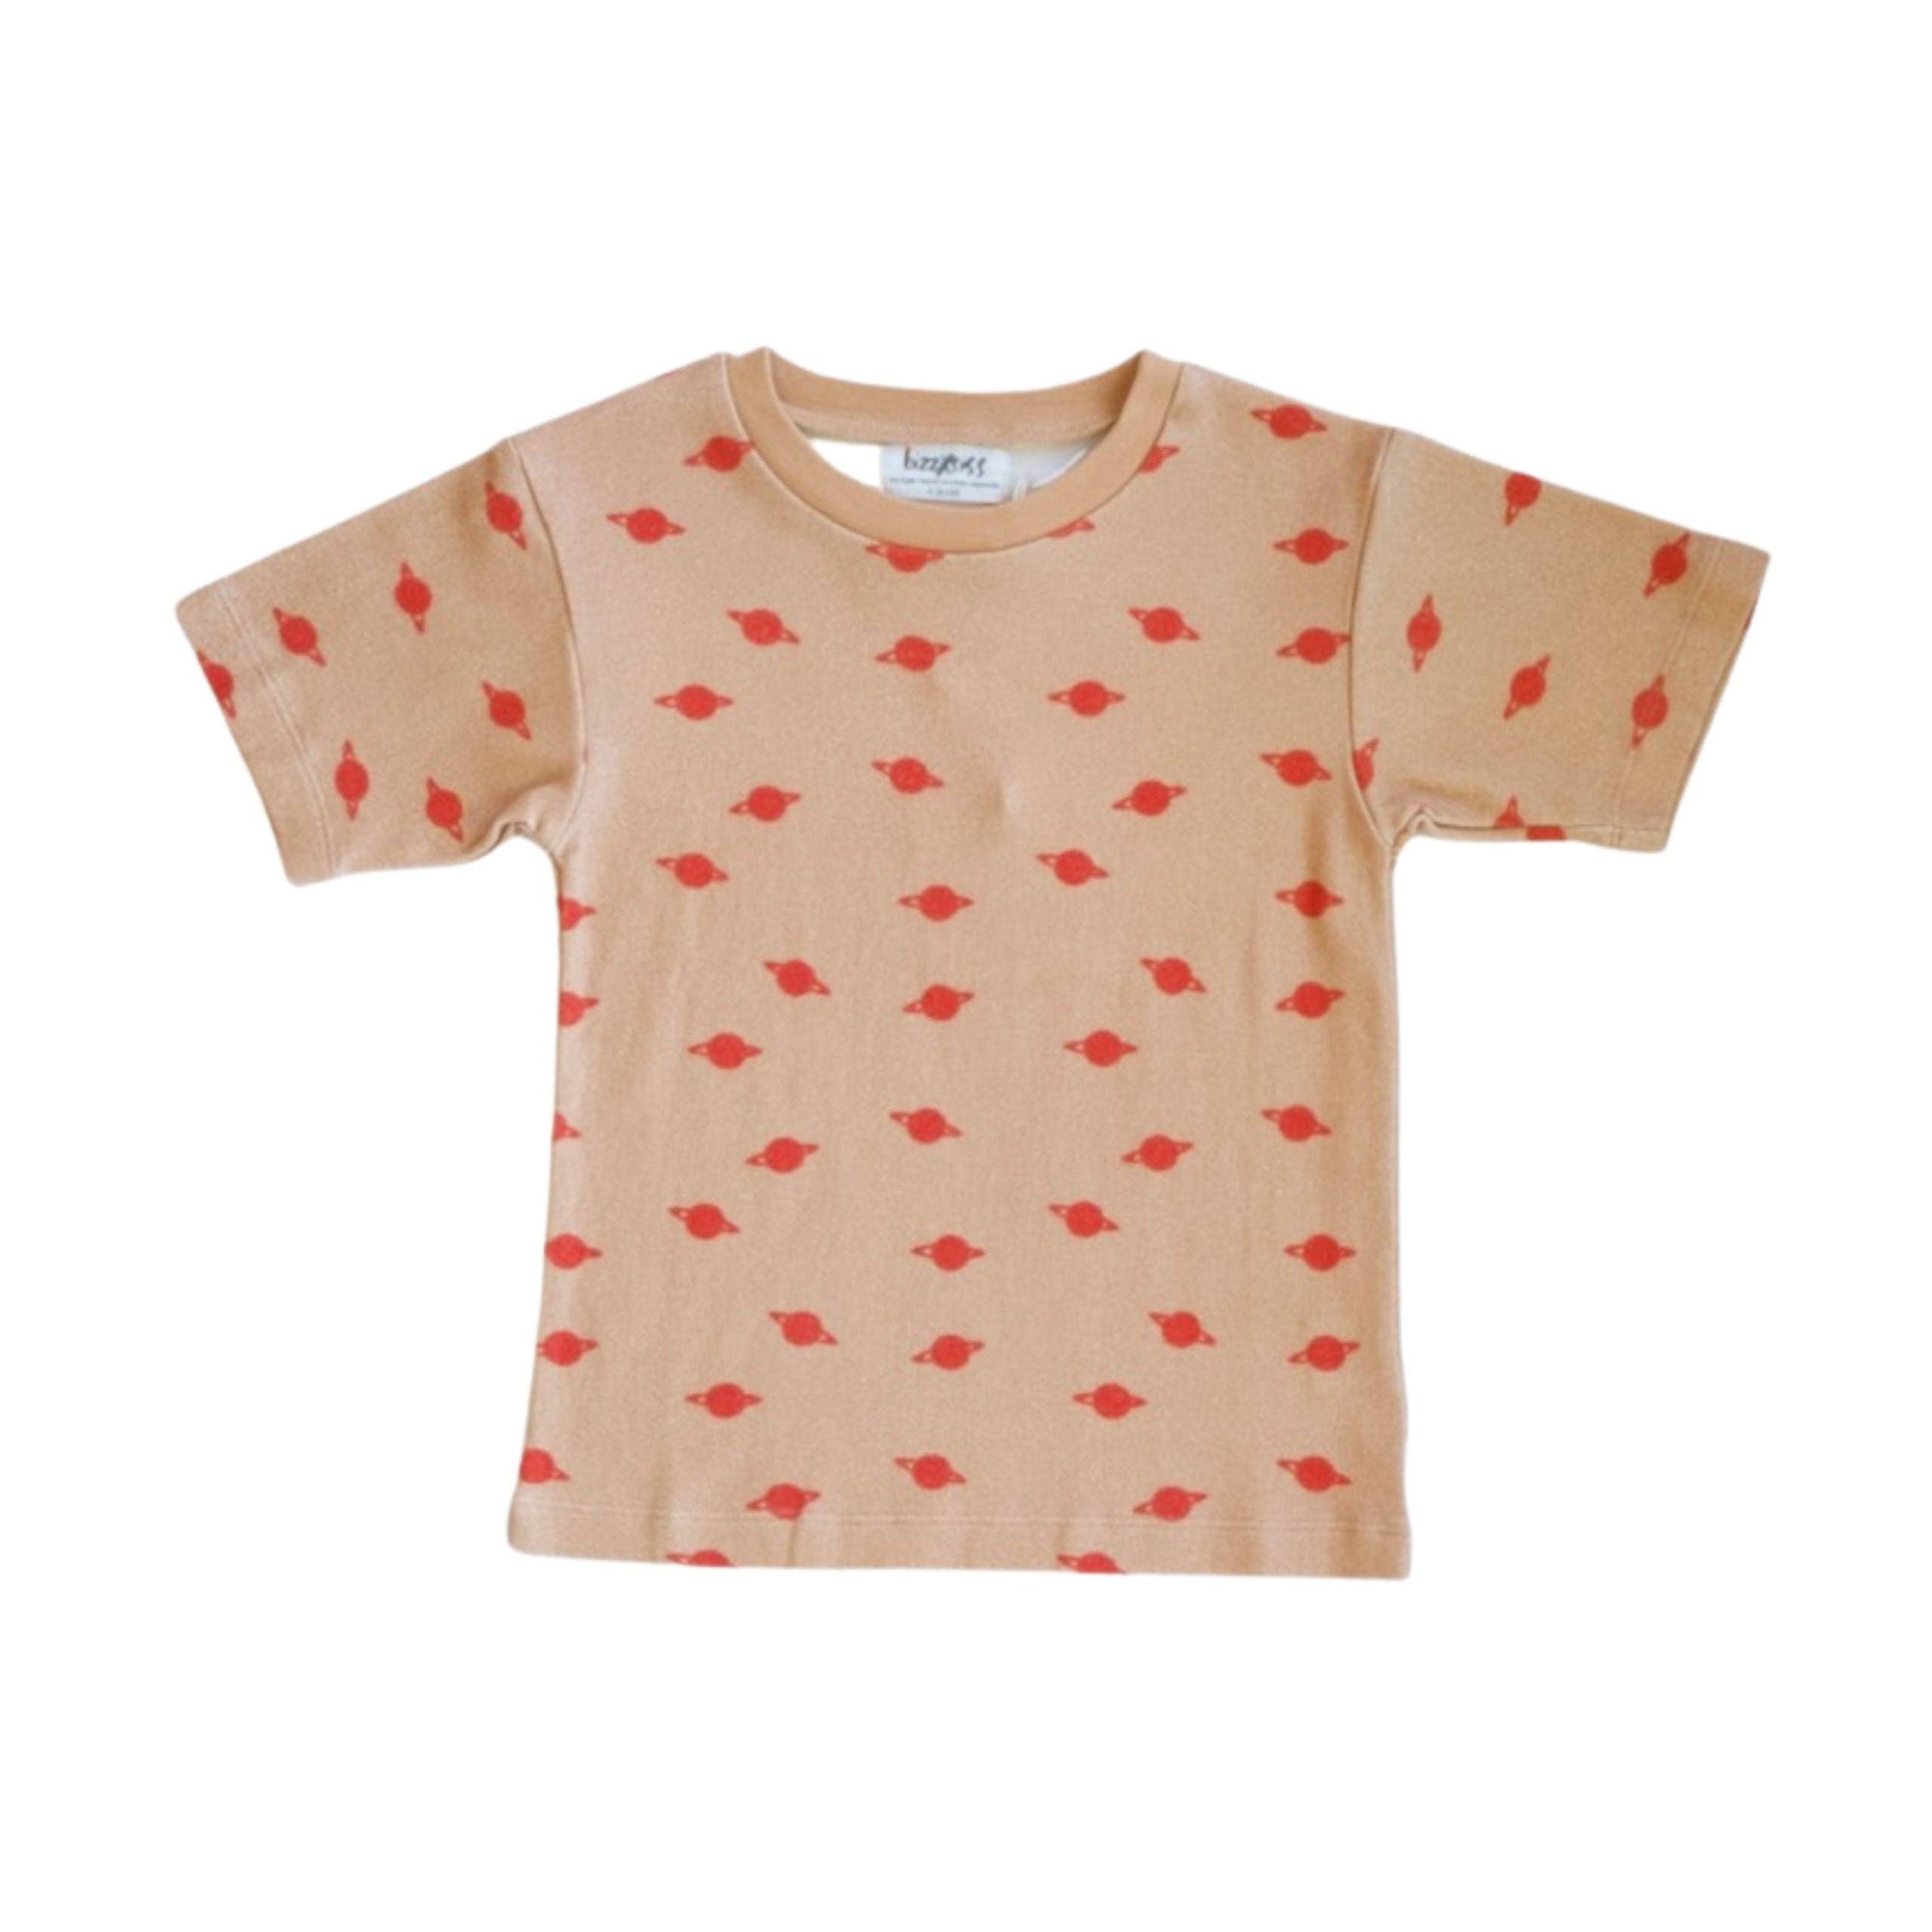 Red and Tan Planet Tee